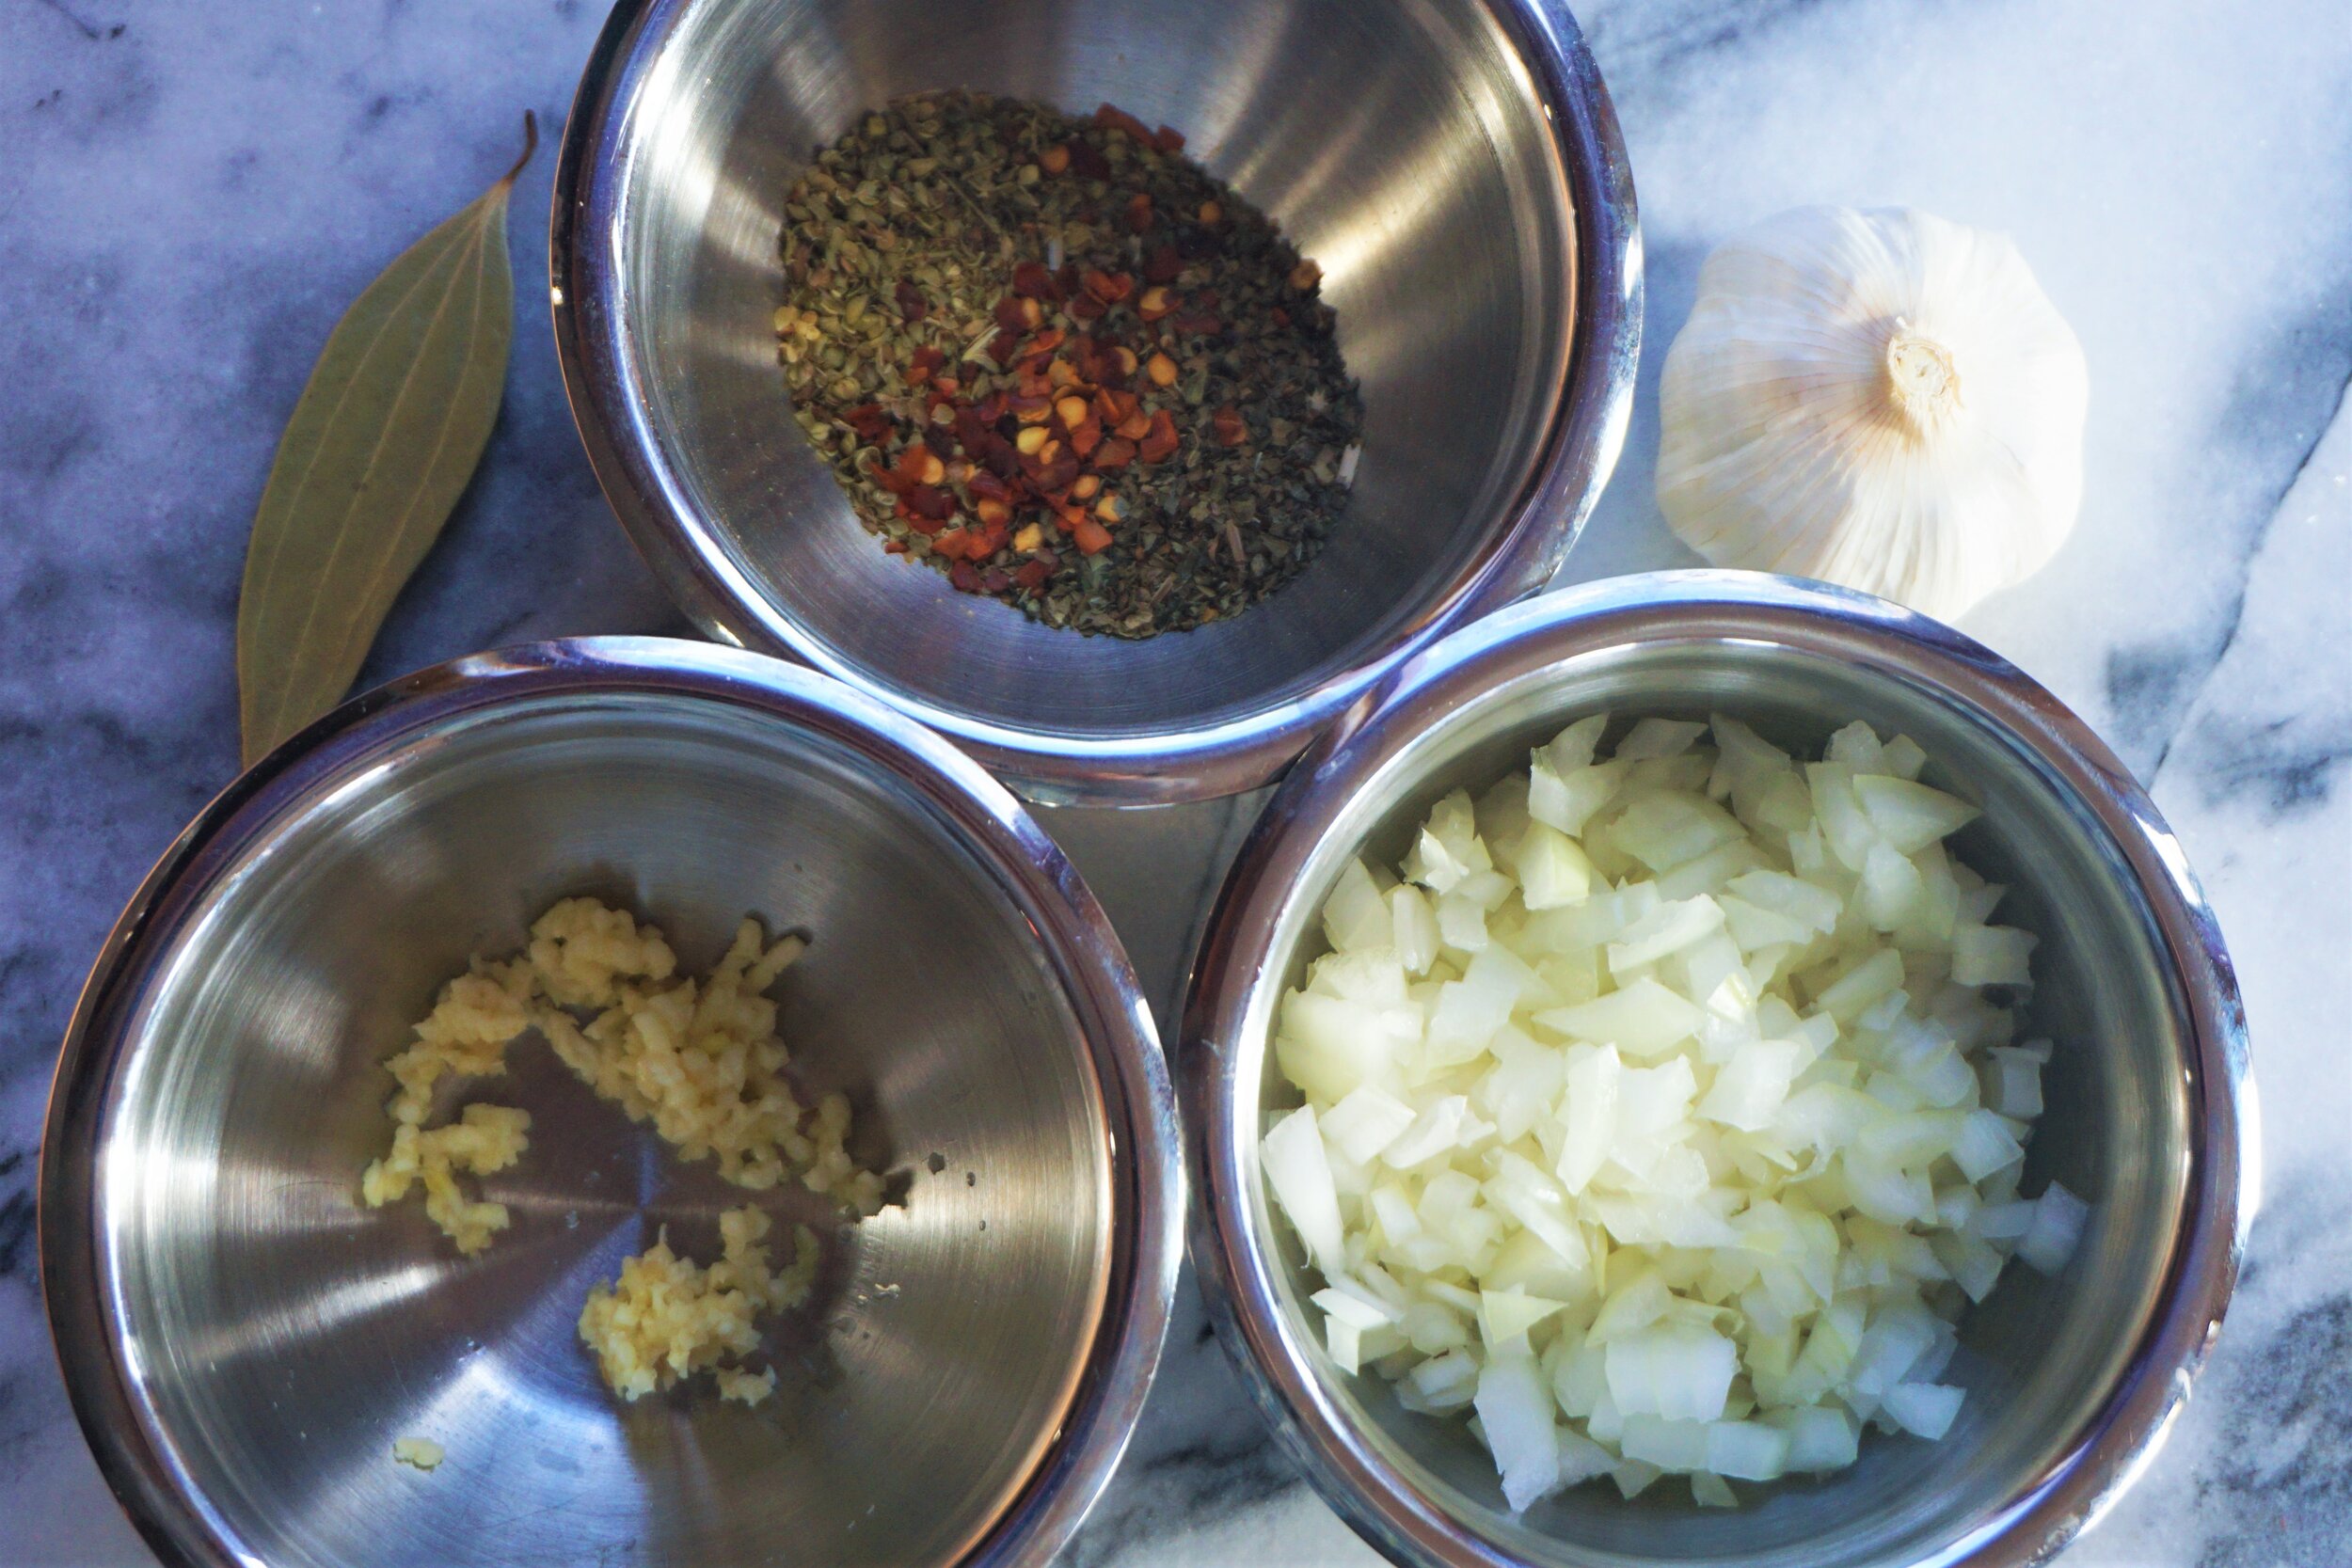 Diced onion, crushed garlic and spices are the first ingredients into the saucepan, so it's a good idea to have them prepped.